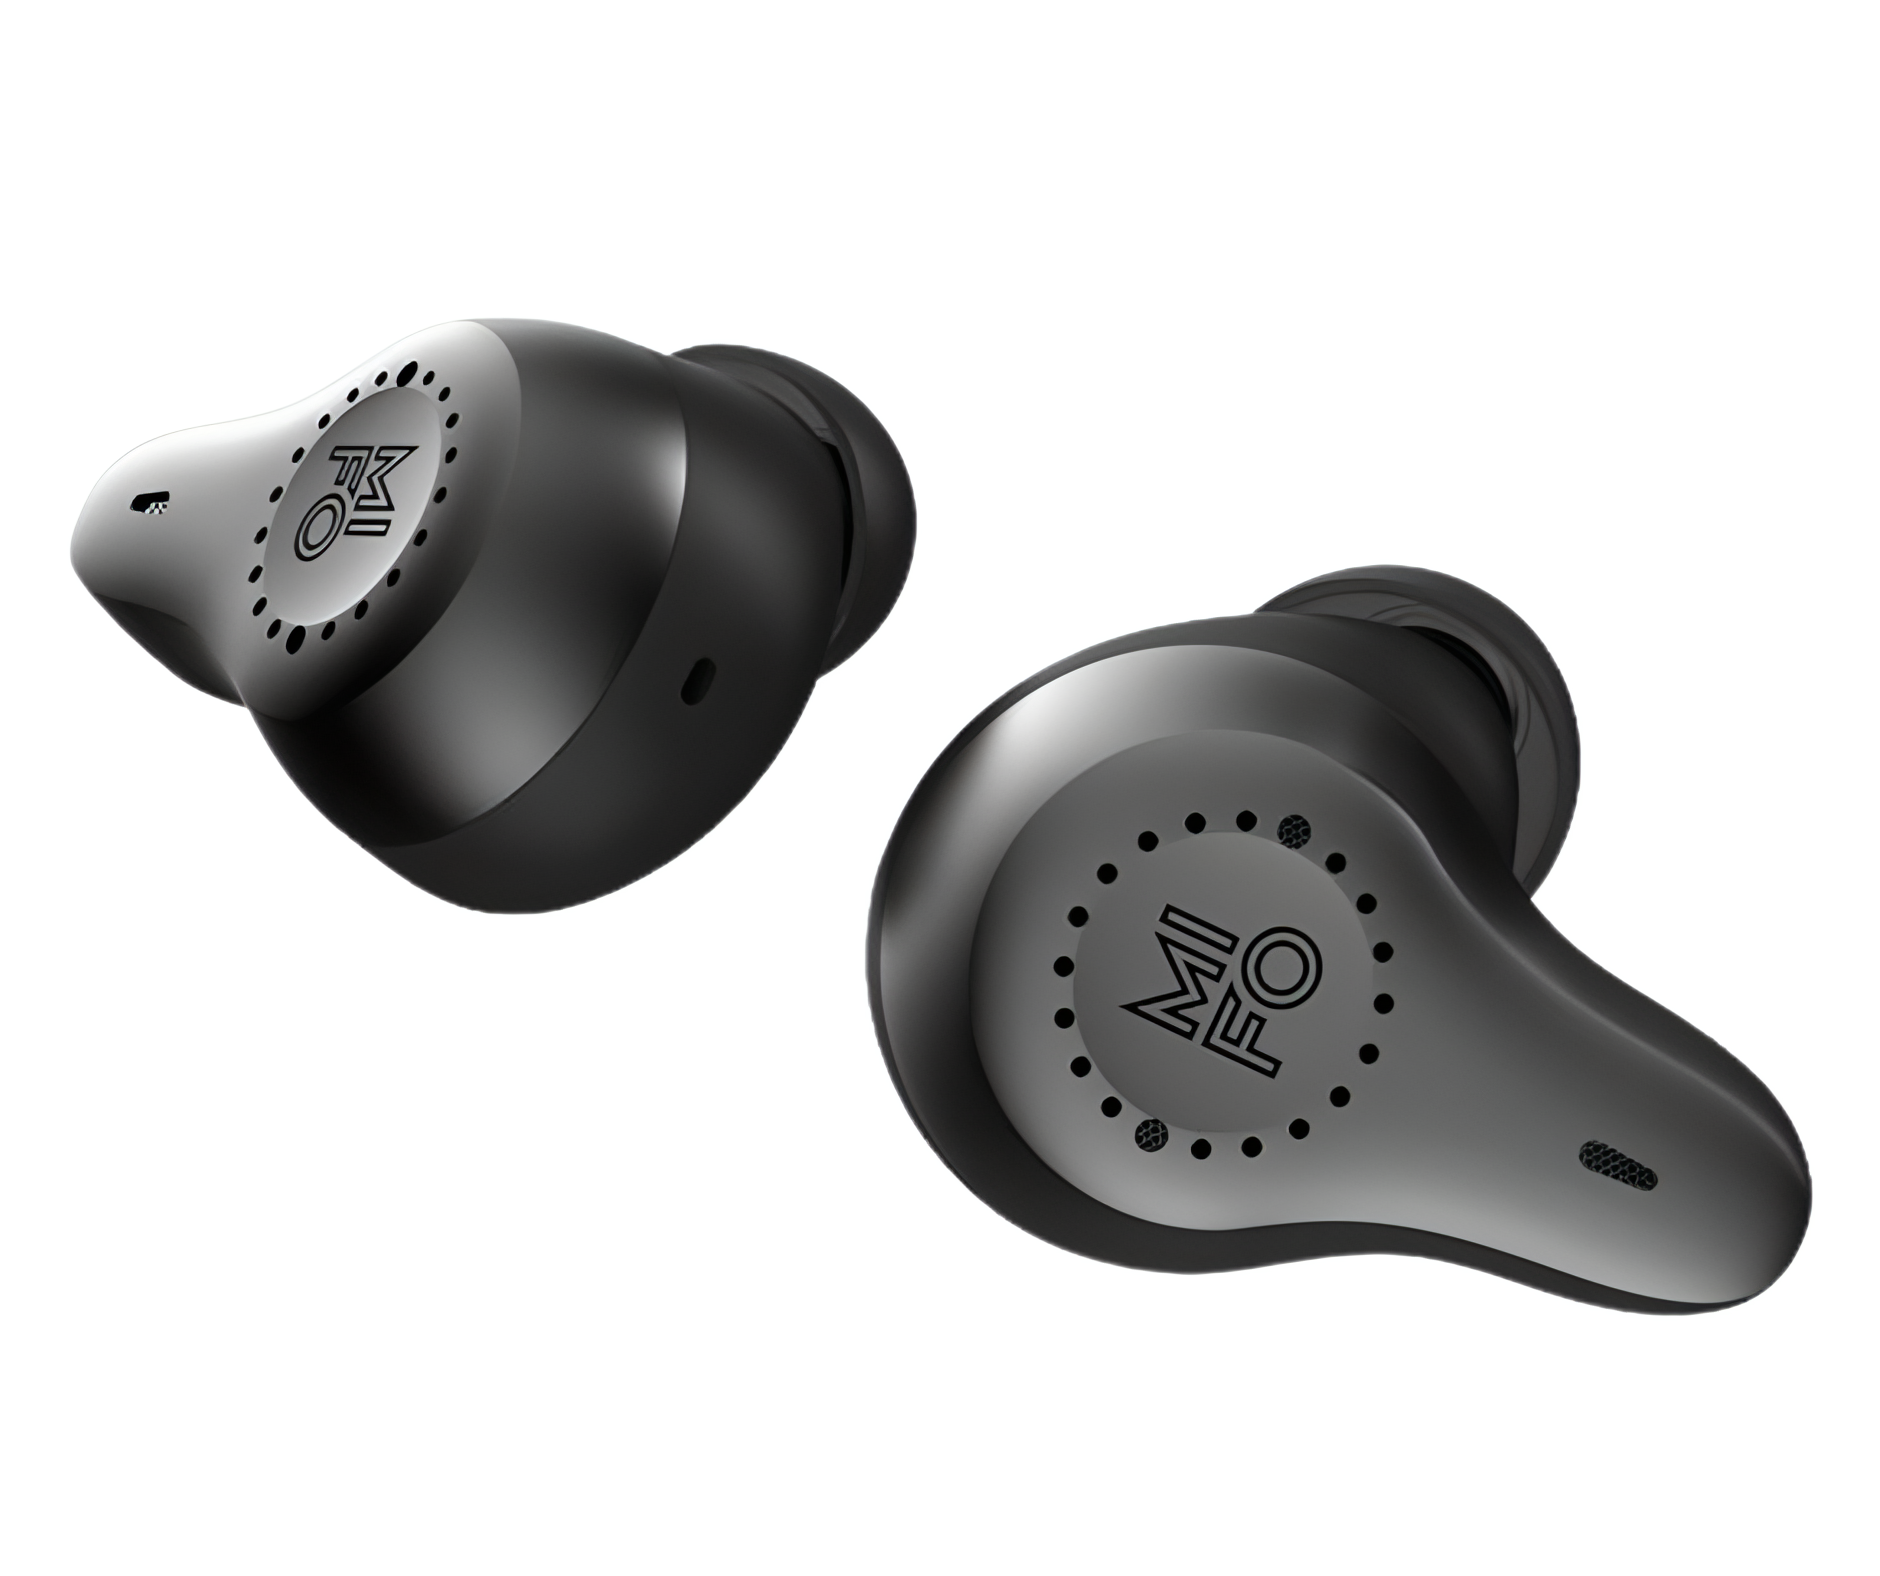 Mifo Earbuds - Best Wirelss Earbuds with IPX7